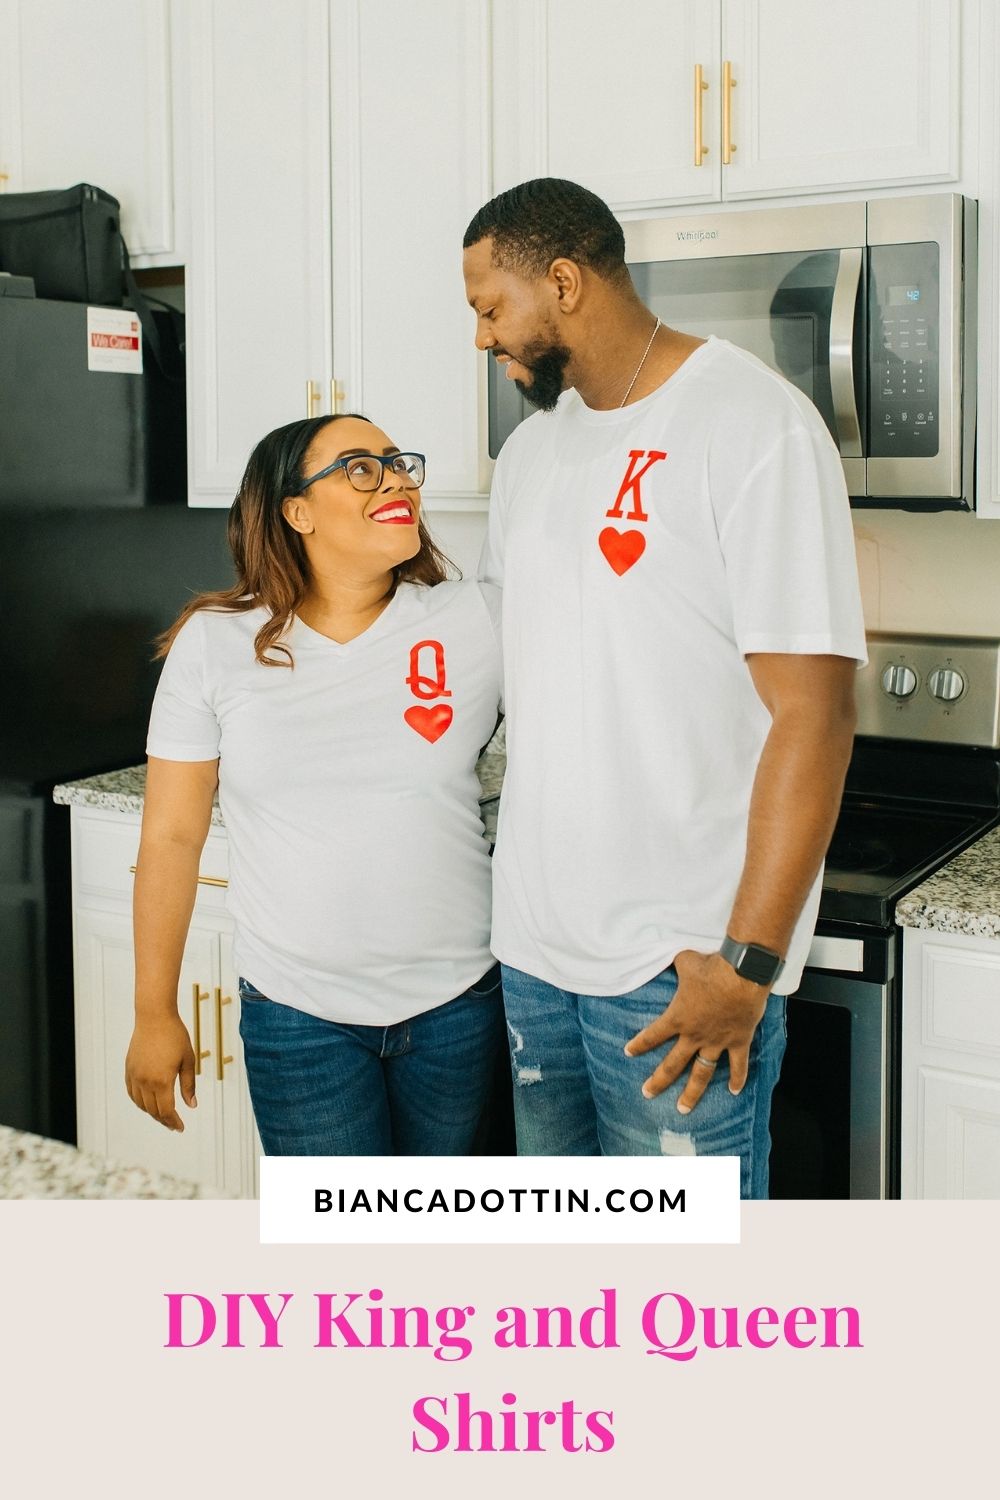 DIY King and Queen Shirts